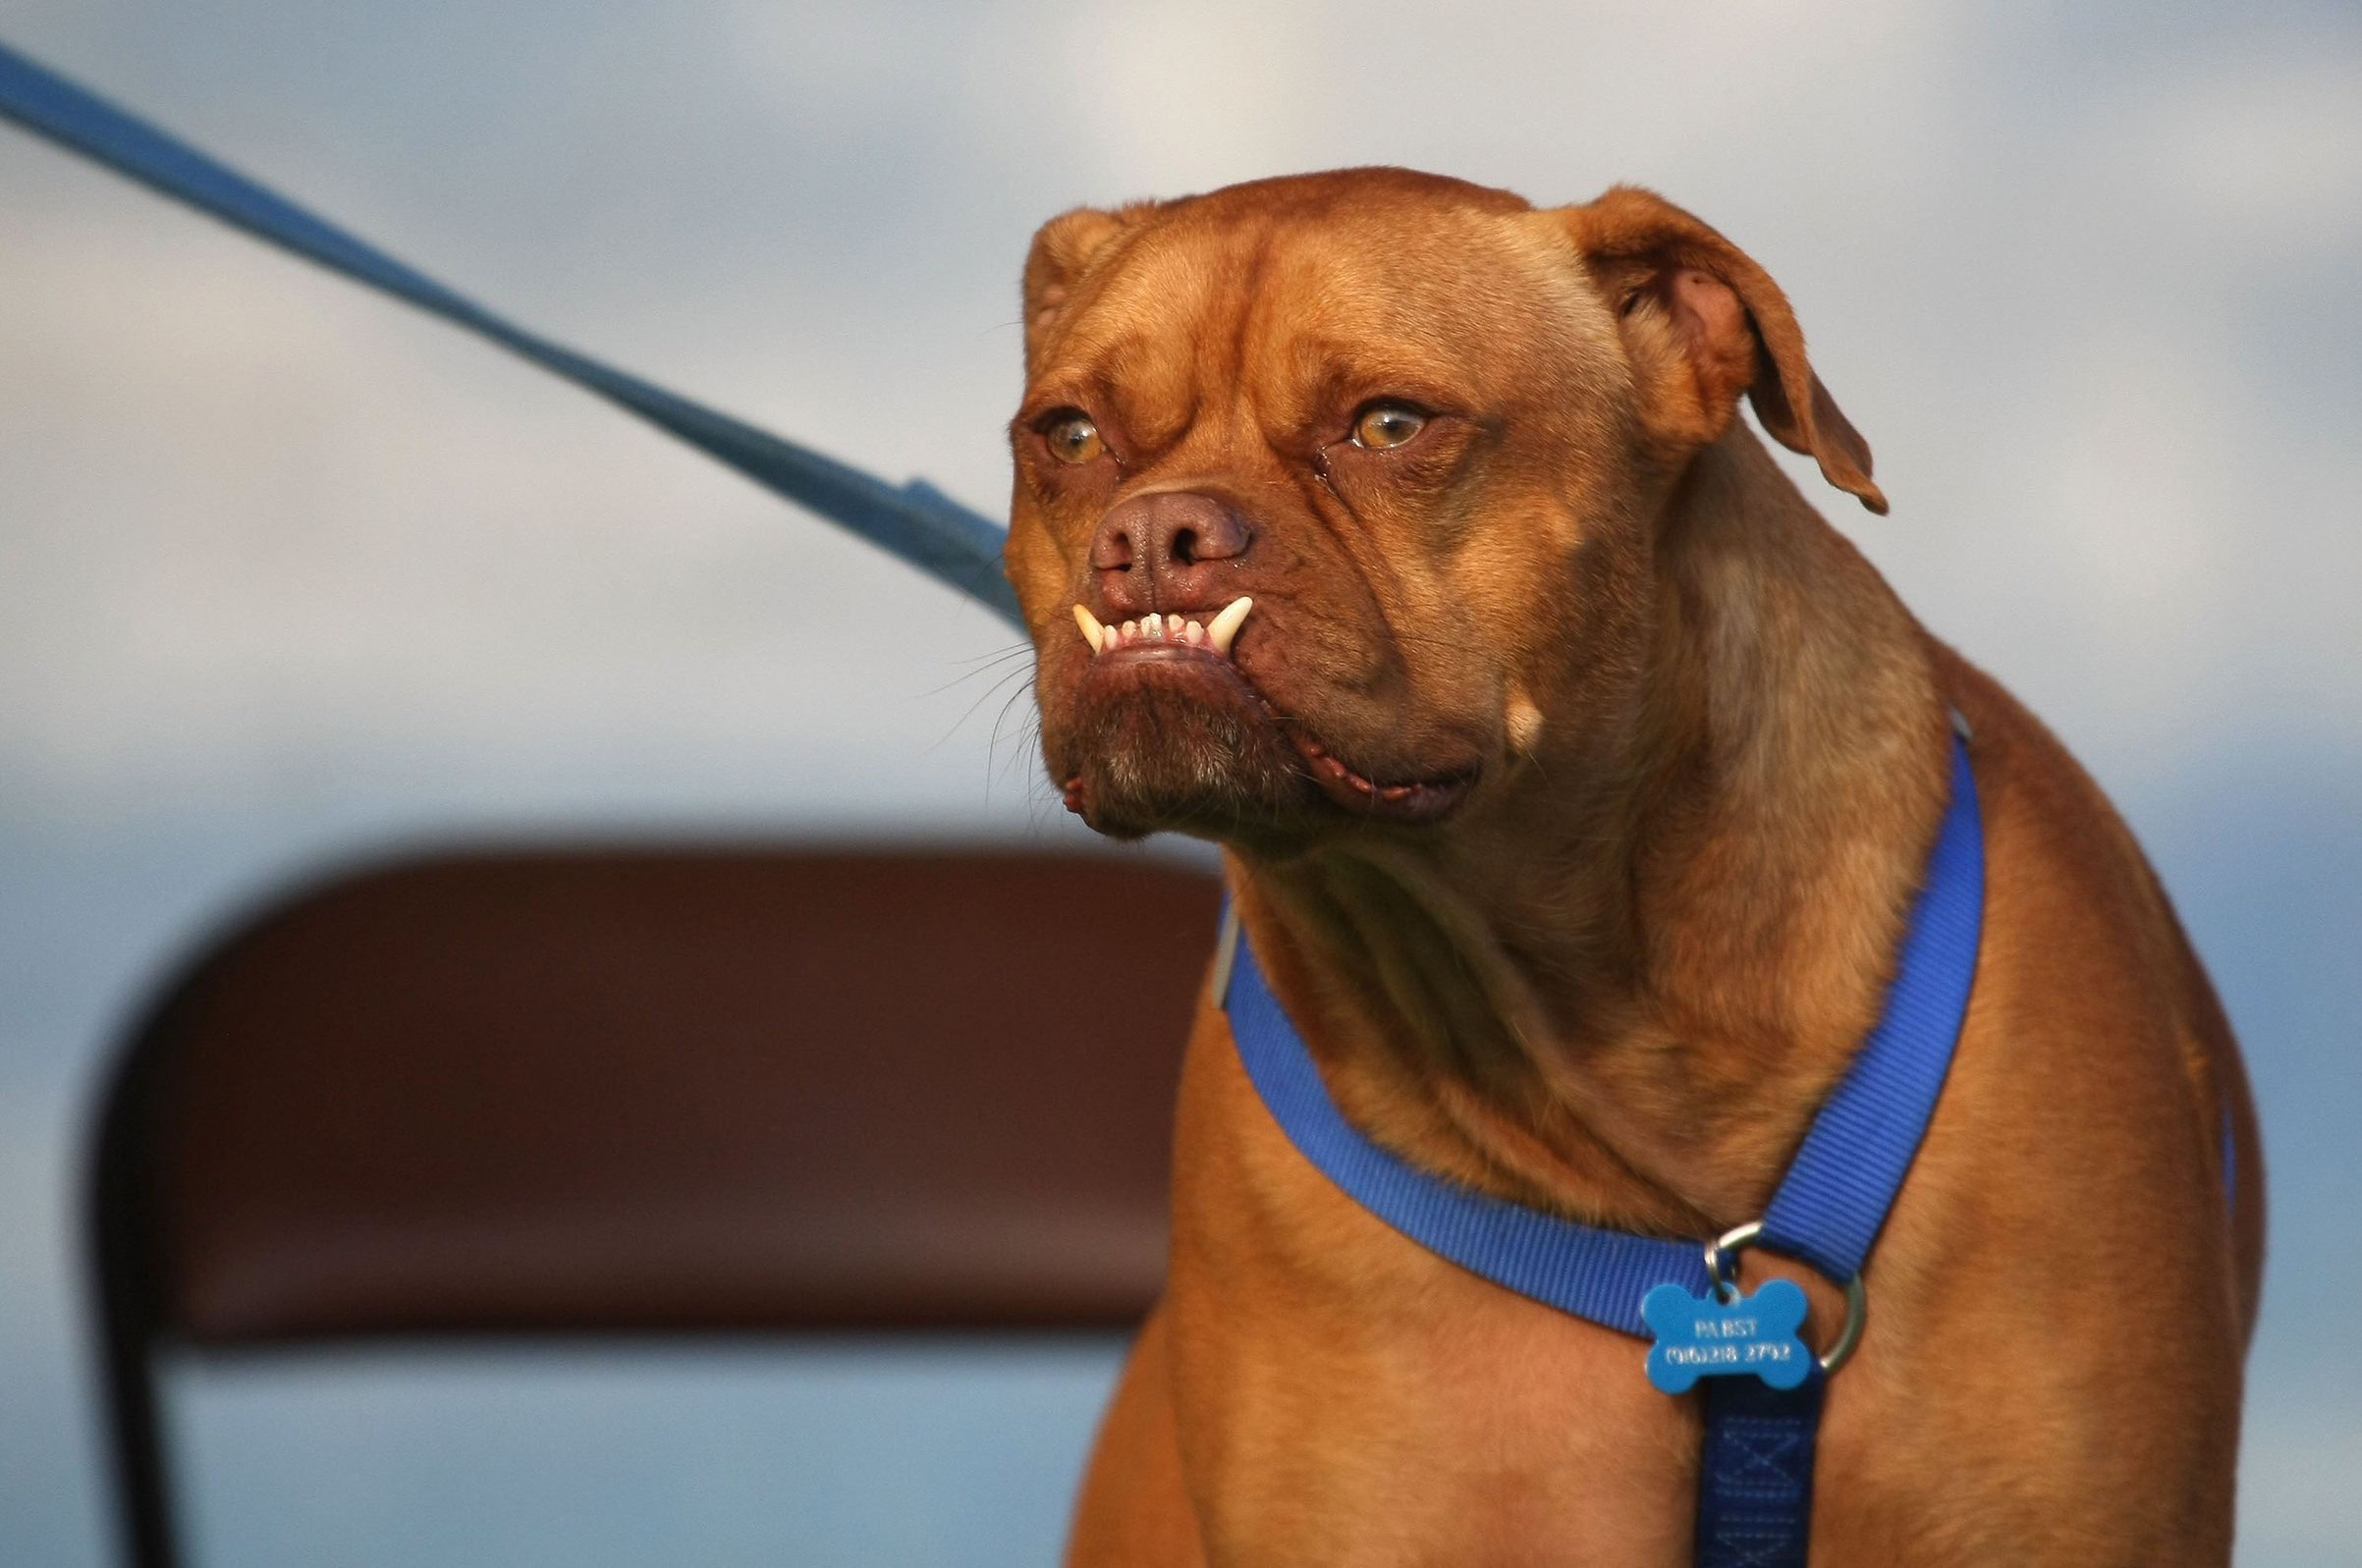 Pabst, a boxer mix, shows off his underbite during the 21st Annual World's Ugliest Dog Contest at the Sonoma-Marin Fair June 26, 2009 in Petaluma, Calif.